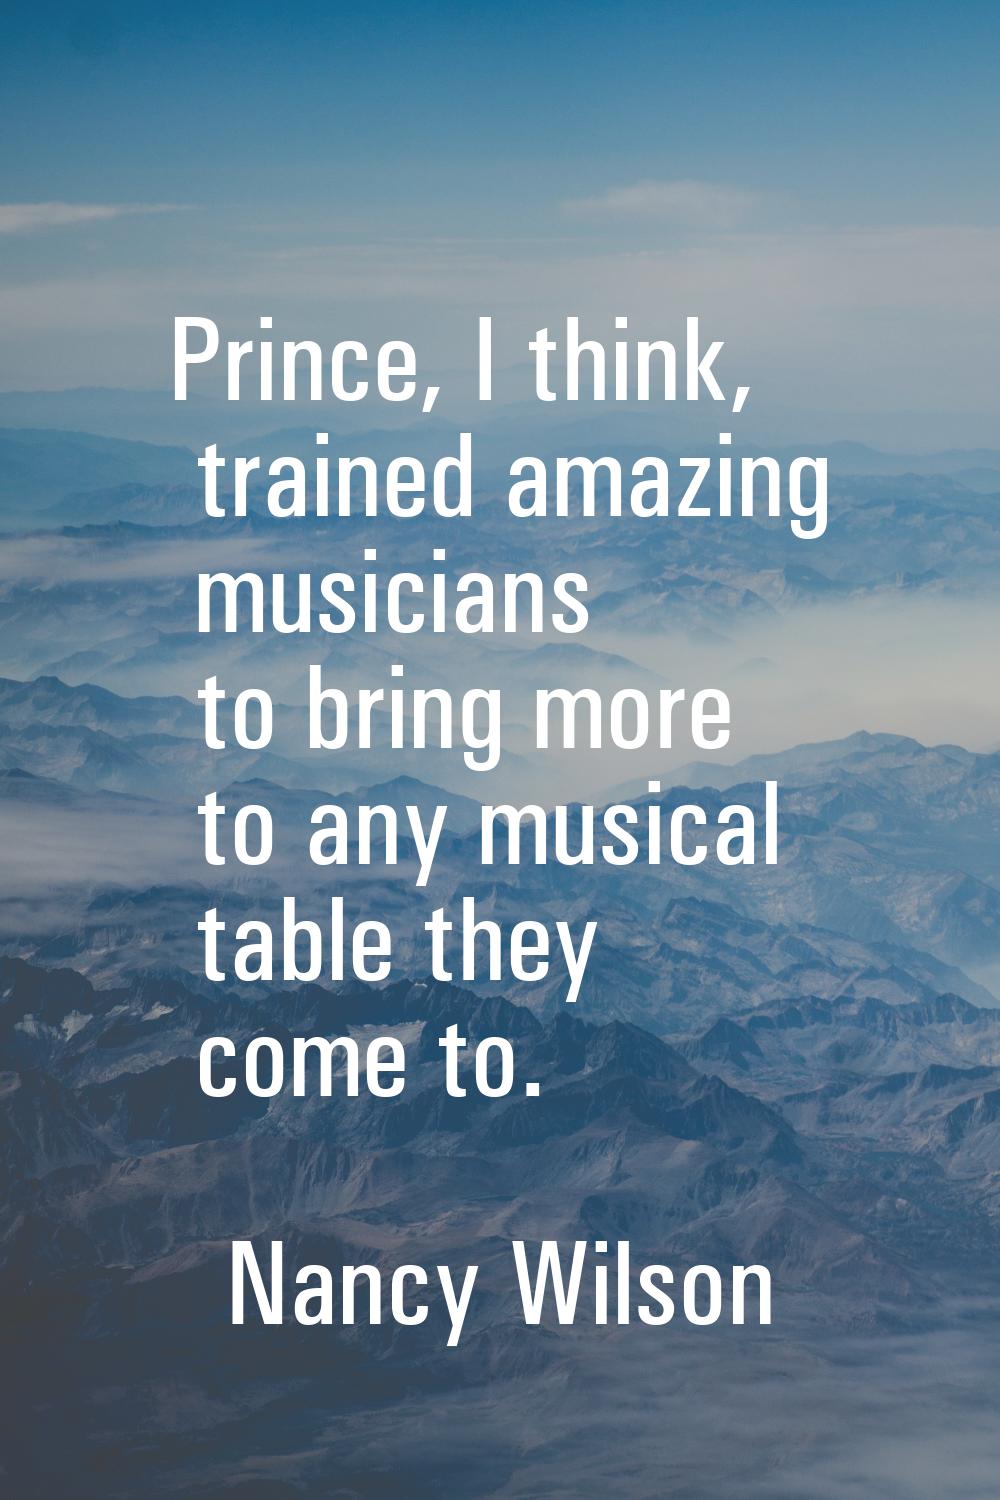 Prince, I think, trained amazing musicians to bring more to any musical table they come to.